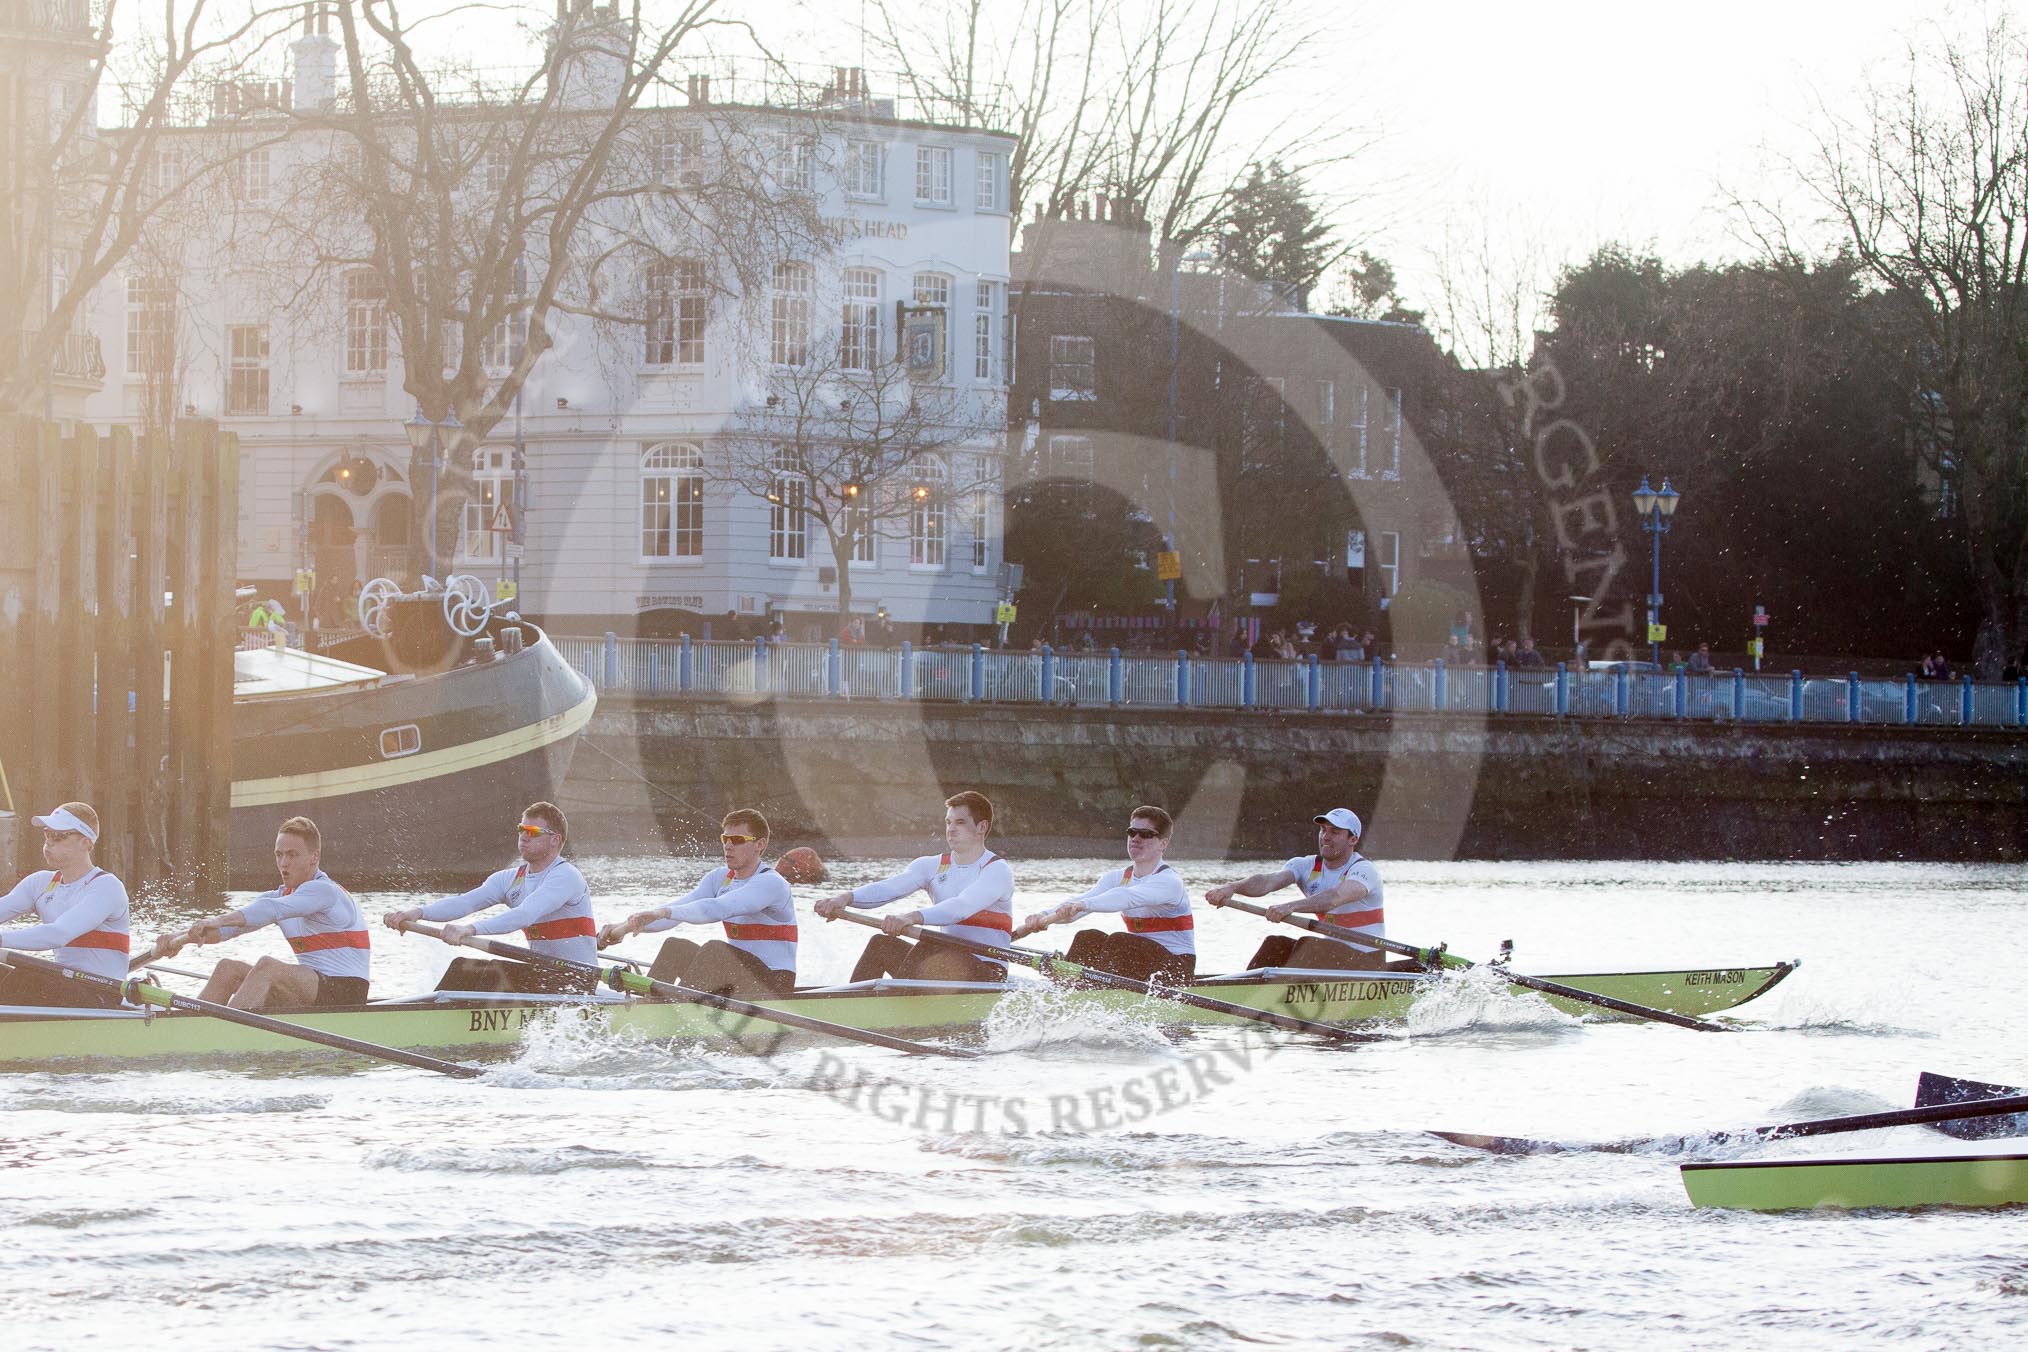 The Boat Race season 2014 - fixture OUBC vs German U23: The race is on - the German U23-boat, on the left, and the OUBC boat at Putney Pier..
River Thames between Putney Bridge and Chiswick Bridge,



on 08 March 2014 at 16:46, image #37